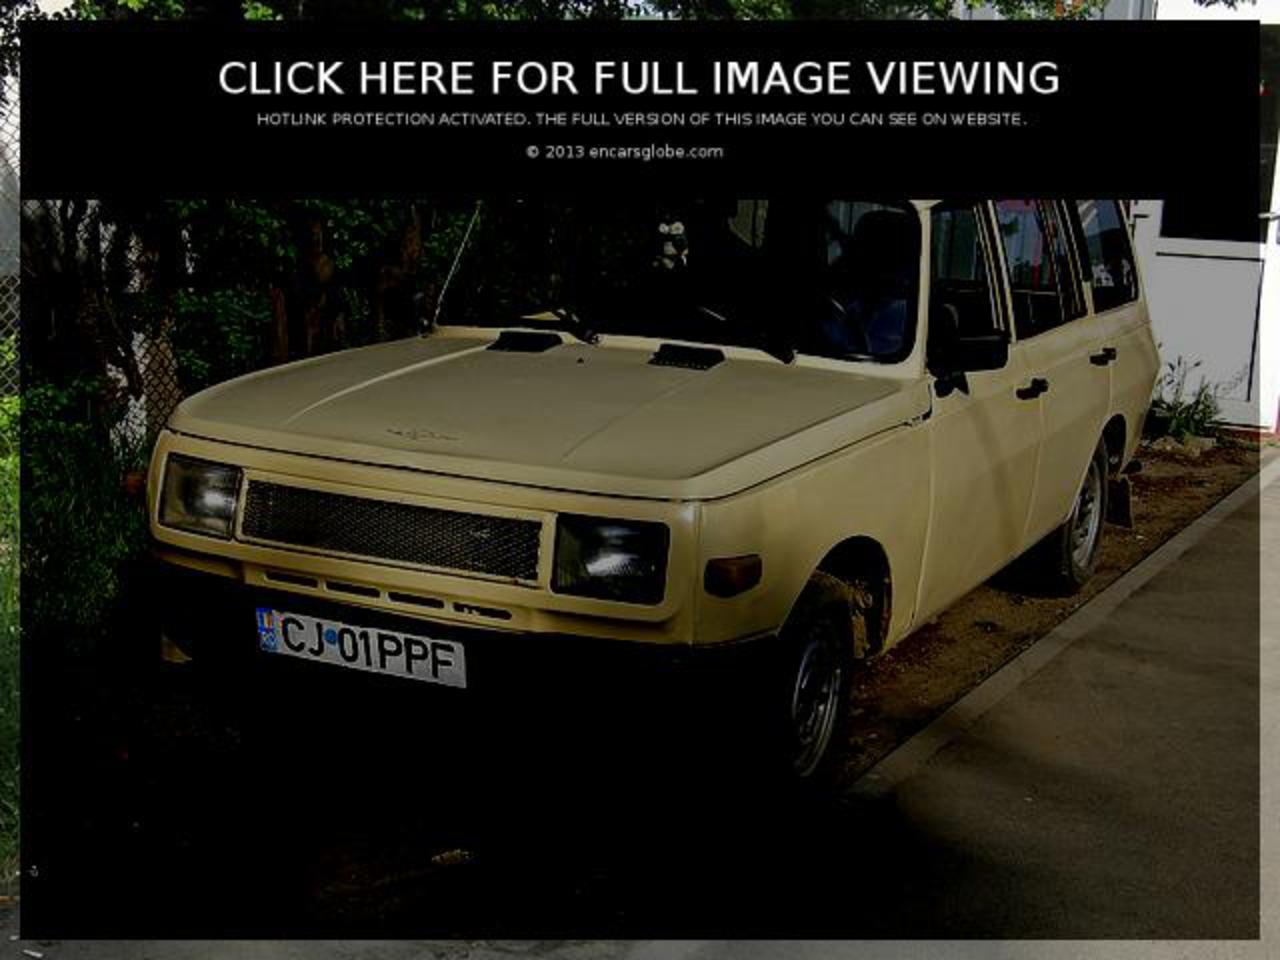 Wartburg 353 combi Photo Gallery: Photo #05 out of 10, Image Size ...